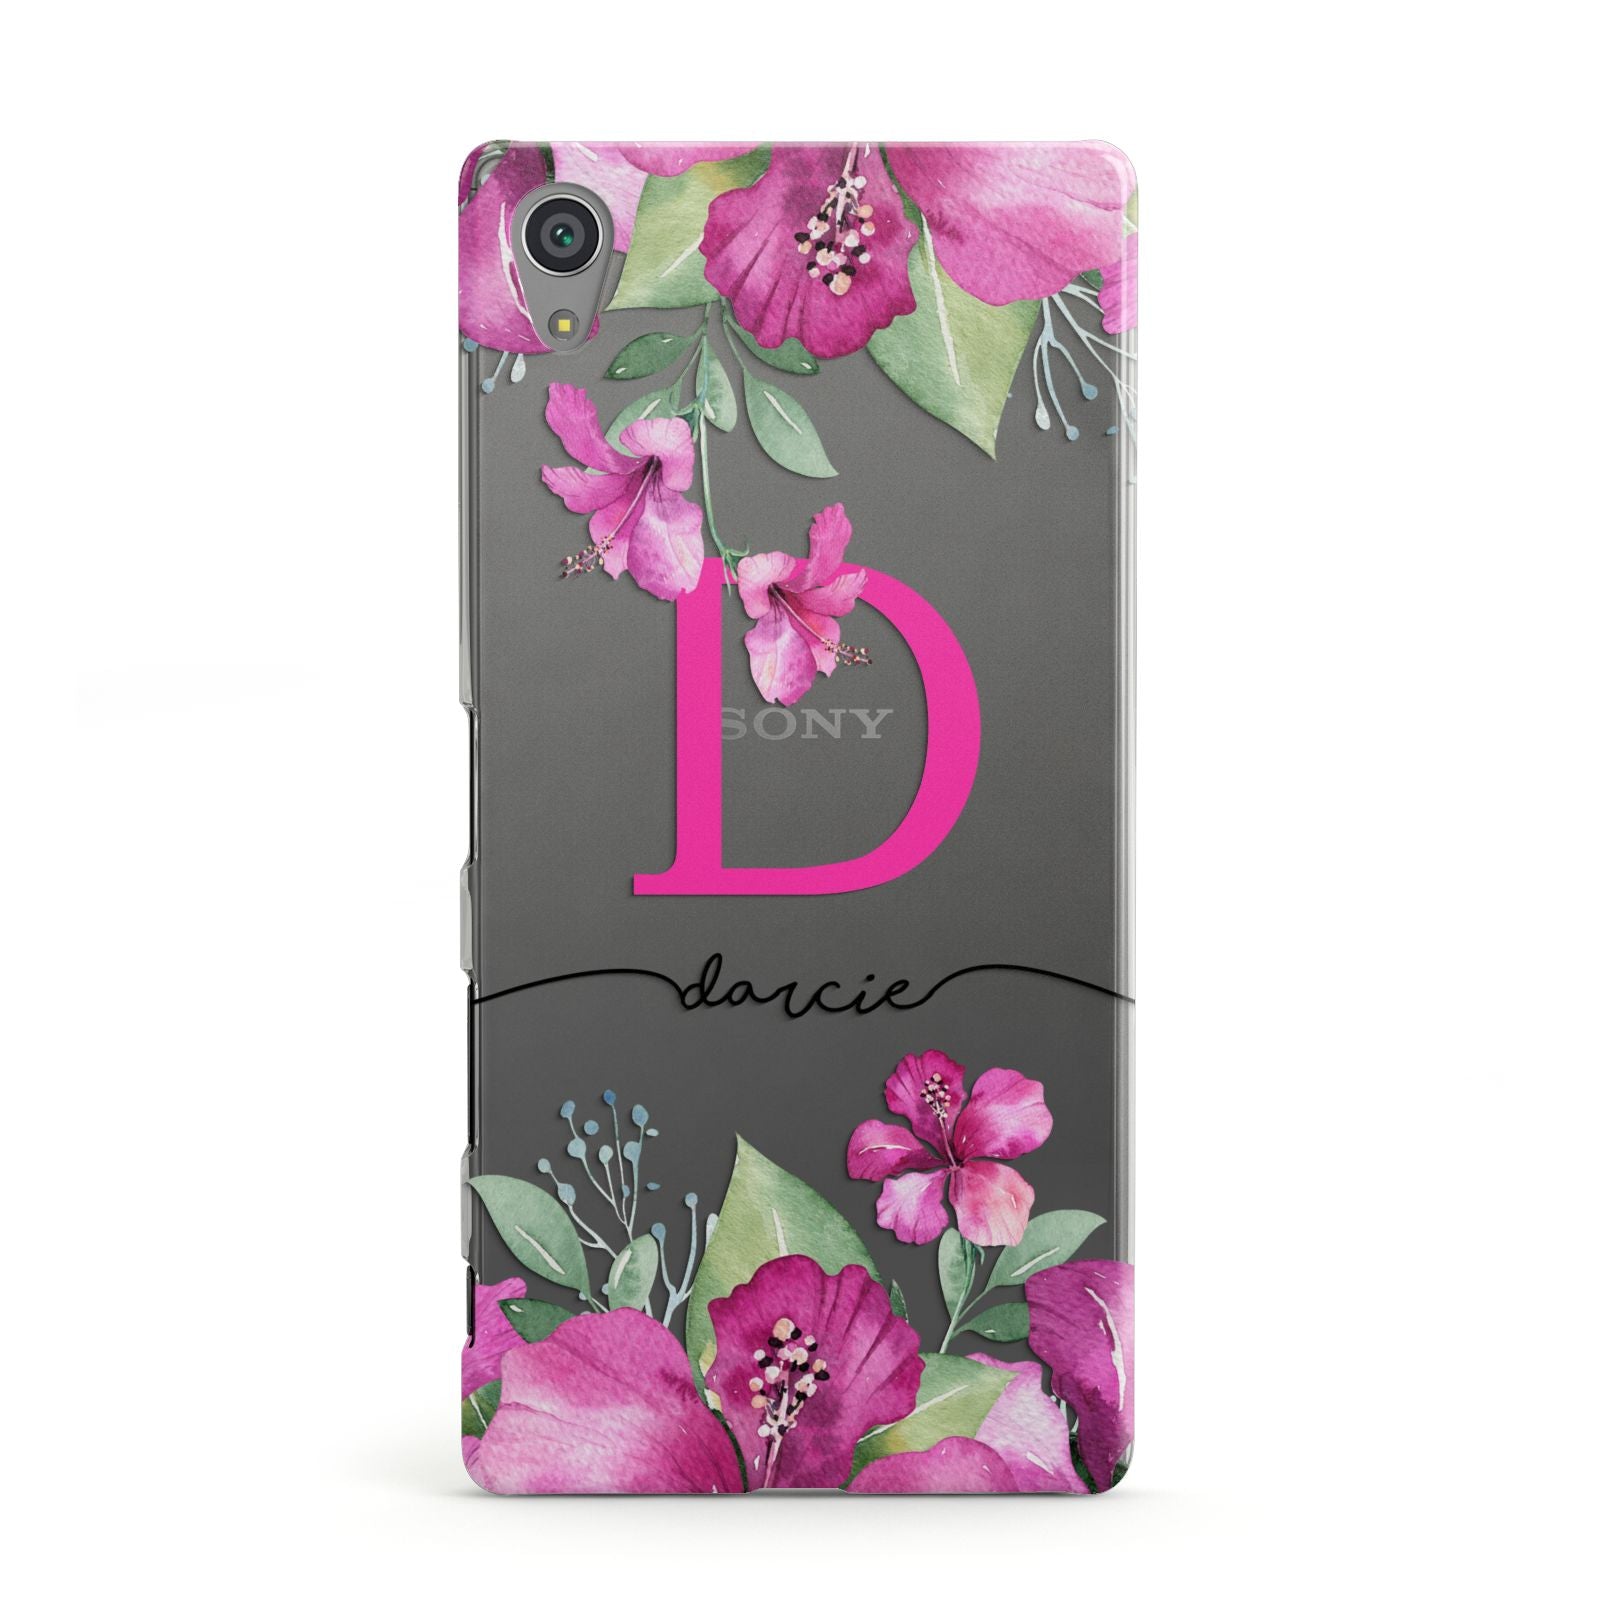 Personalised Pink Lilies Sony Xperia Case